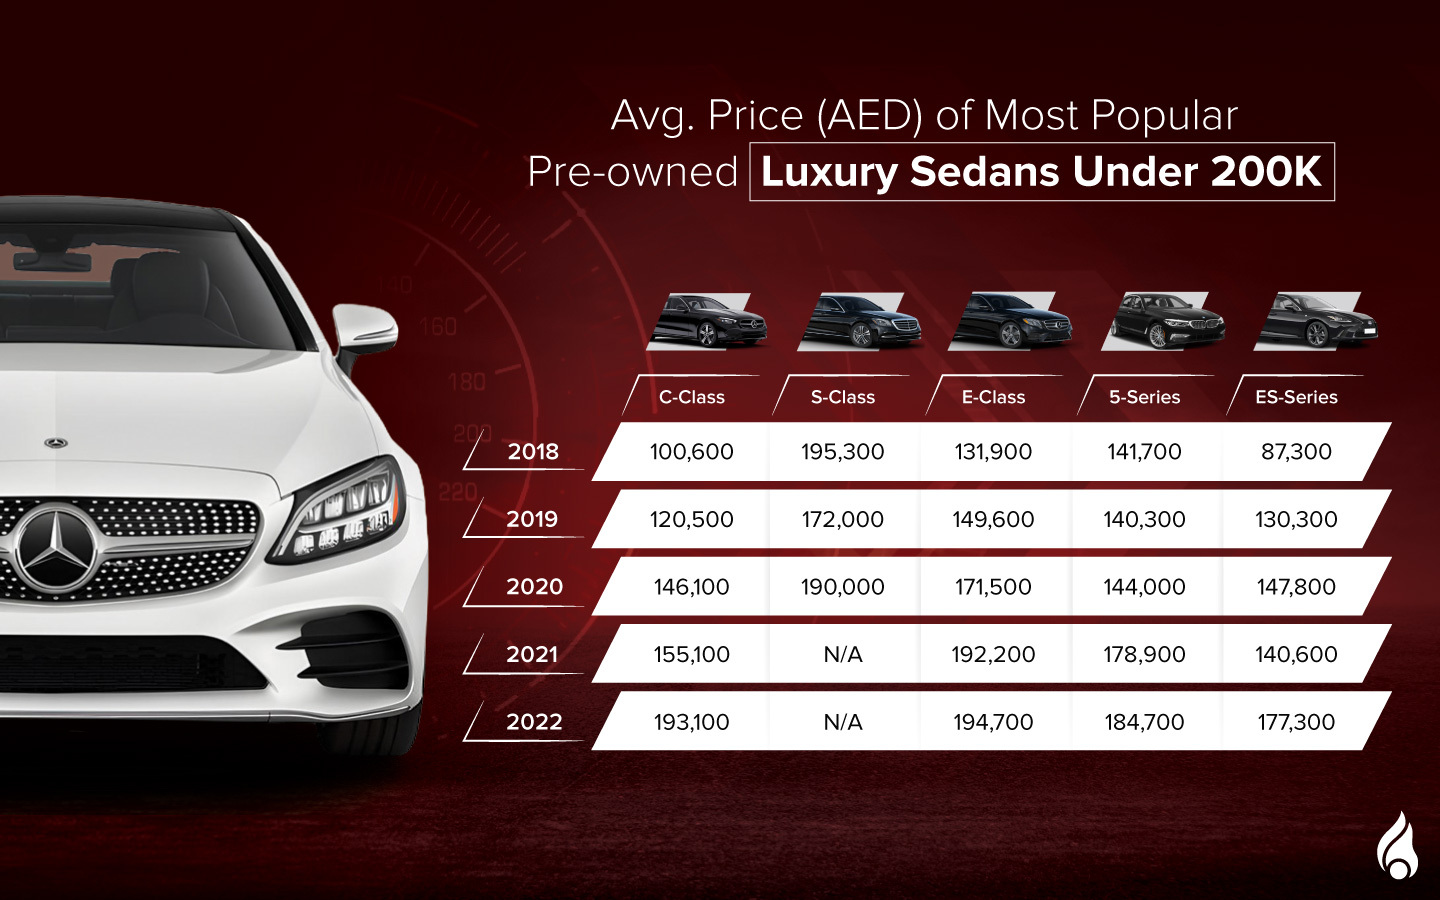 a list of the average prices of the top Pre-Owned Luxury Sedans under AED 200K